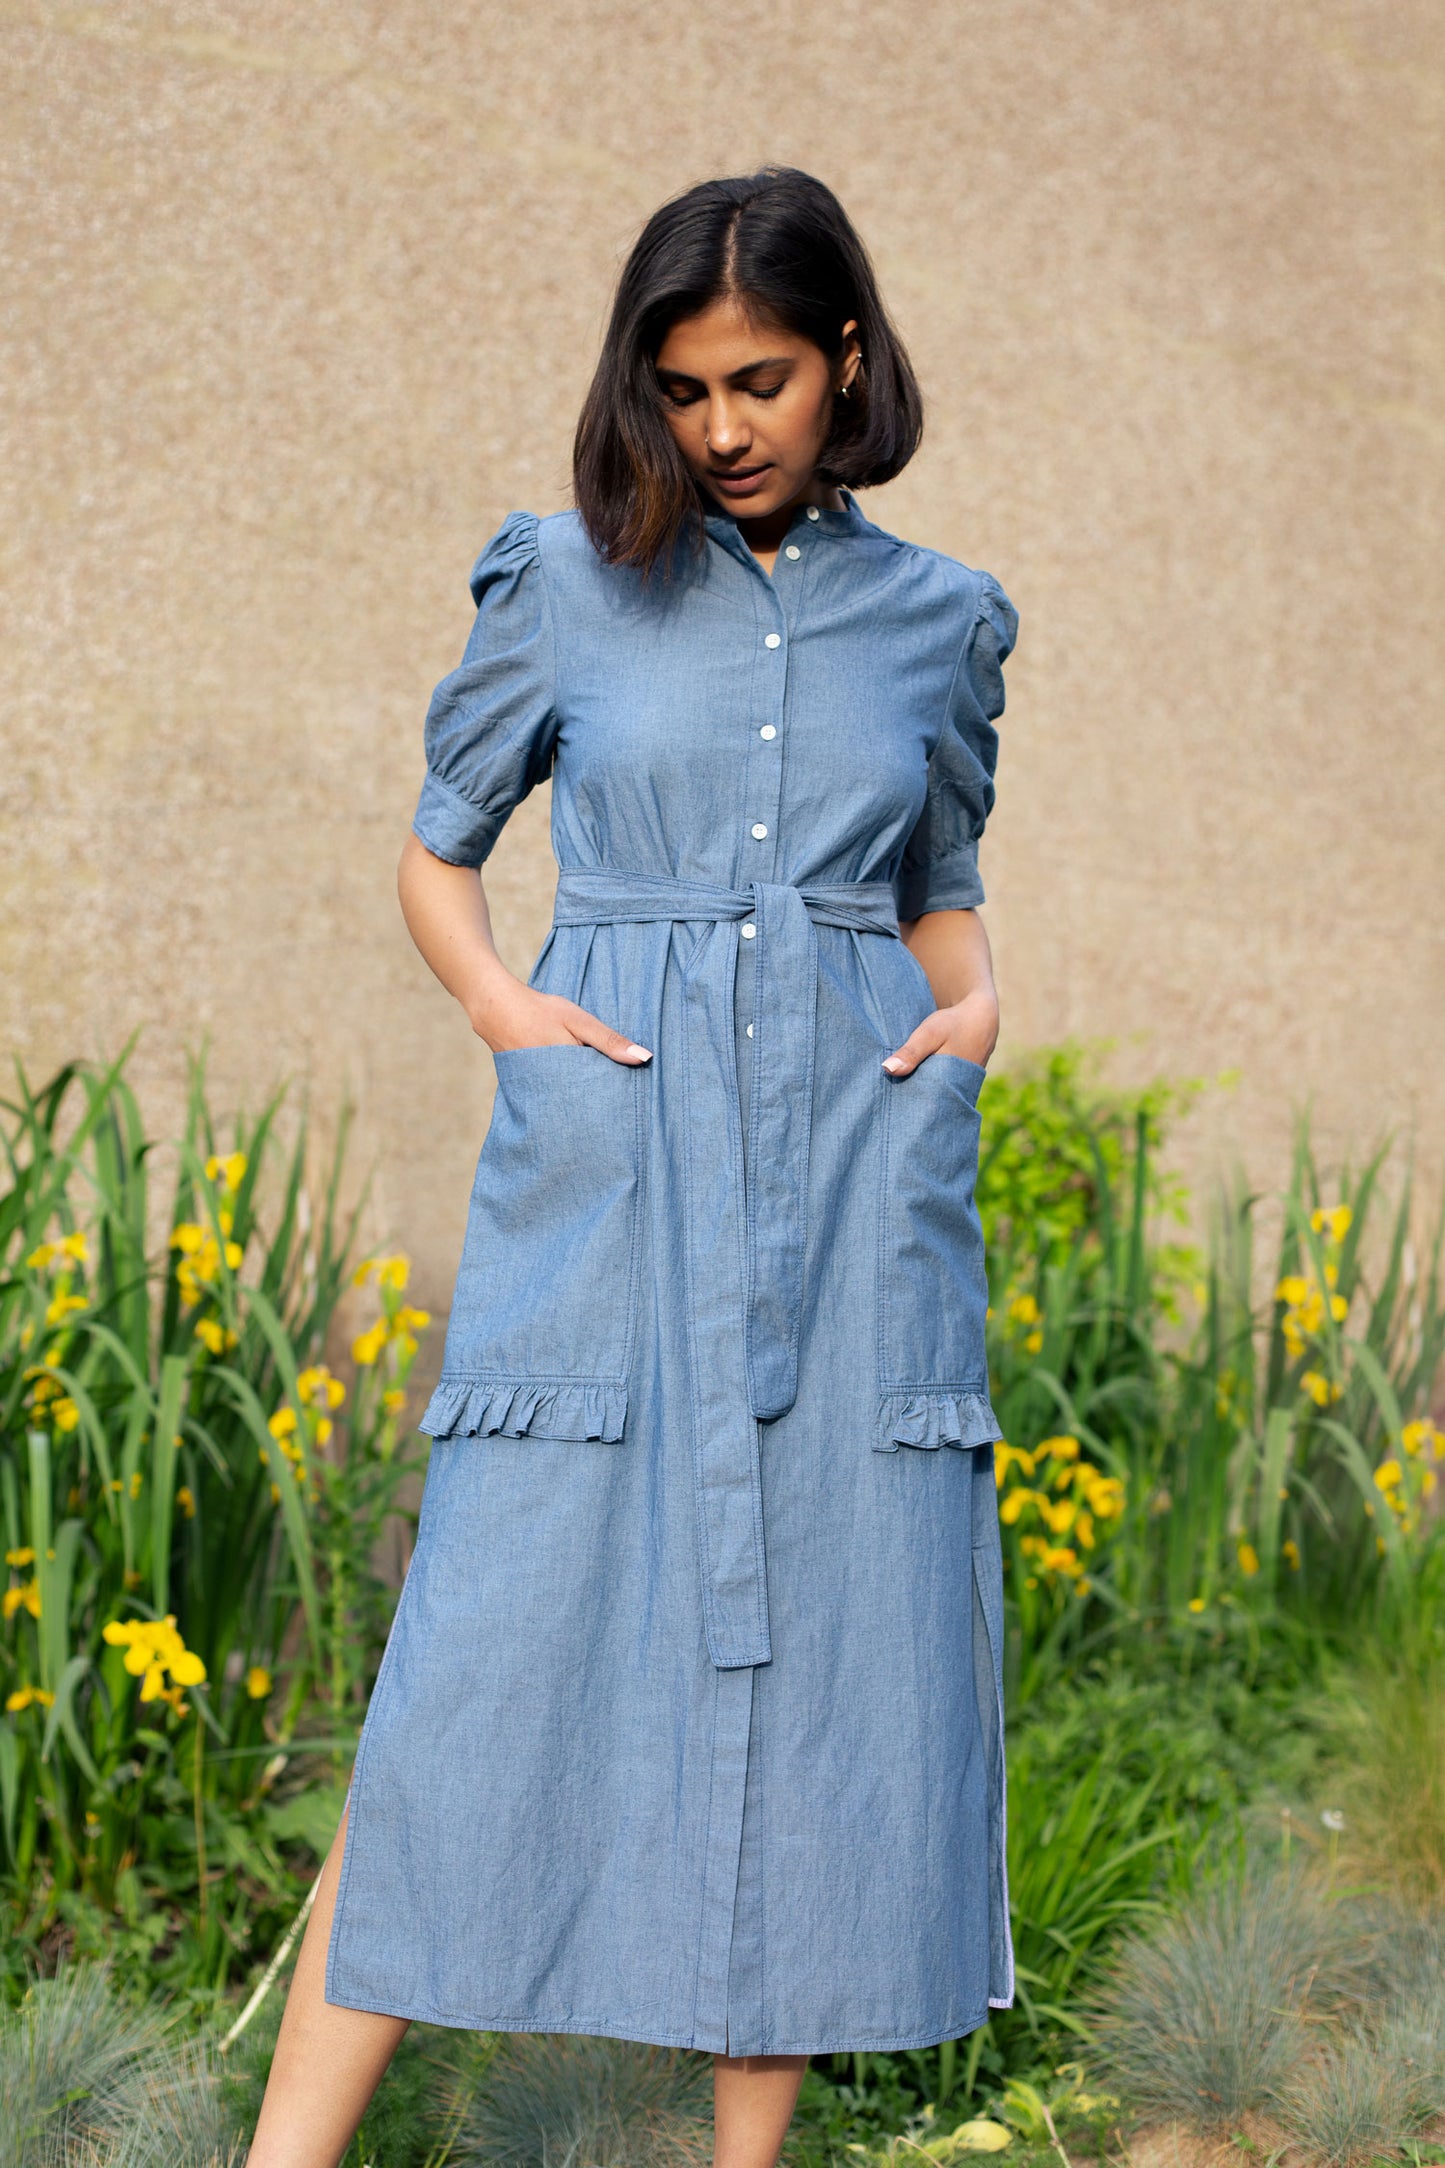 Model wears Saywood's Rosa denim shirtdress in light wash Japanese denim; a long line style with patch pockets and ruffles, a belt tied round the waist. She stands with her hands in her pockets loccking towards the floor. Yellow flowers can be seen in the background.